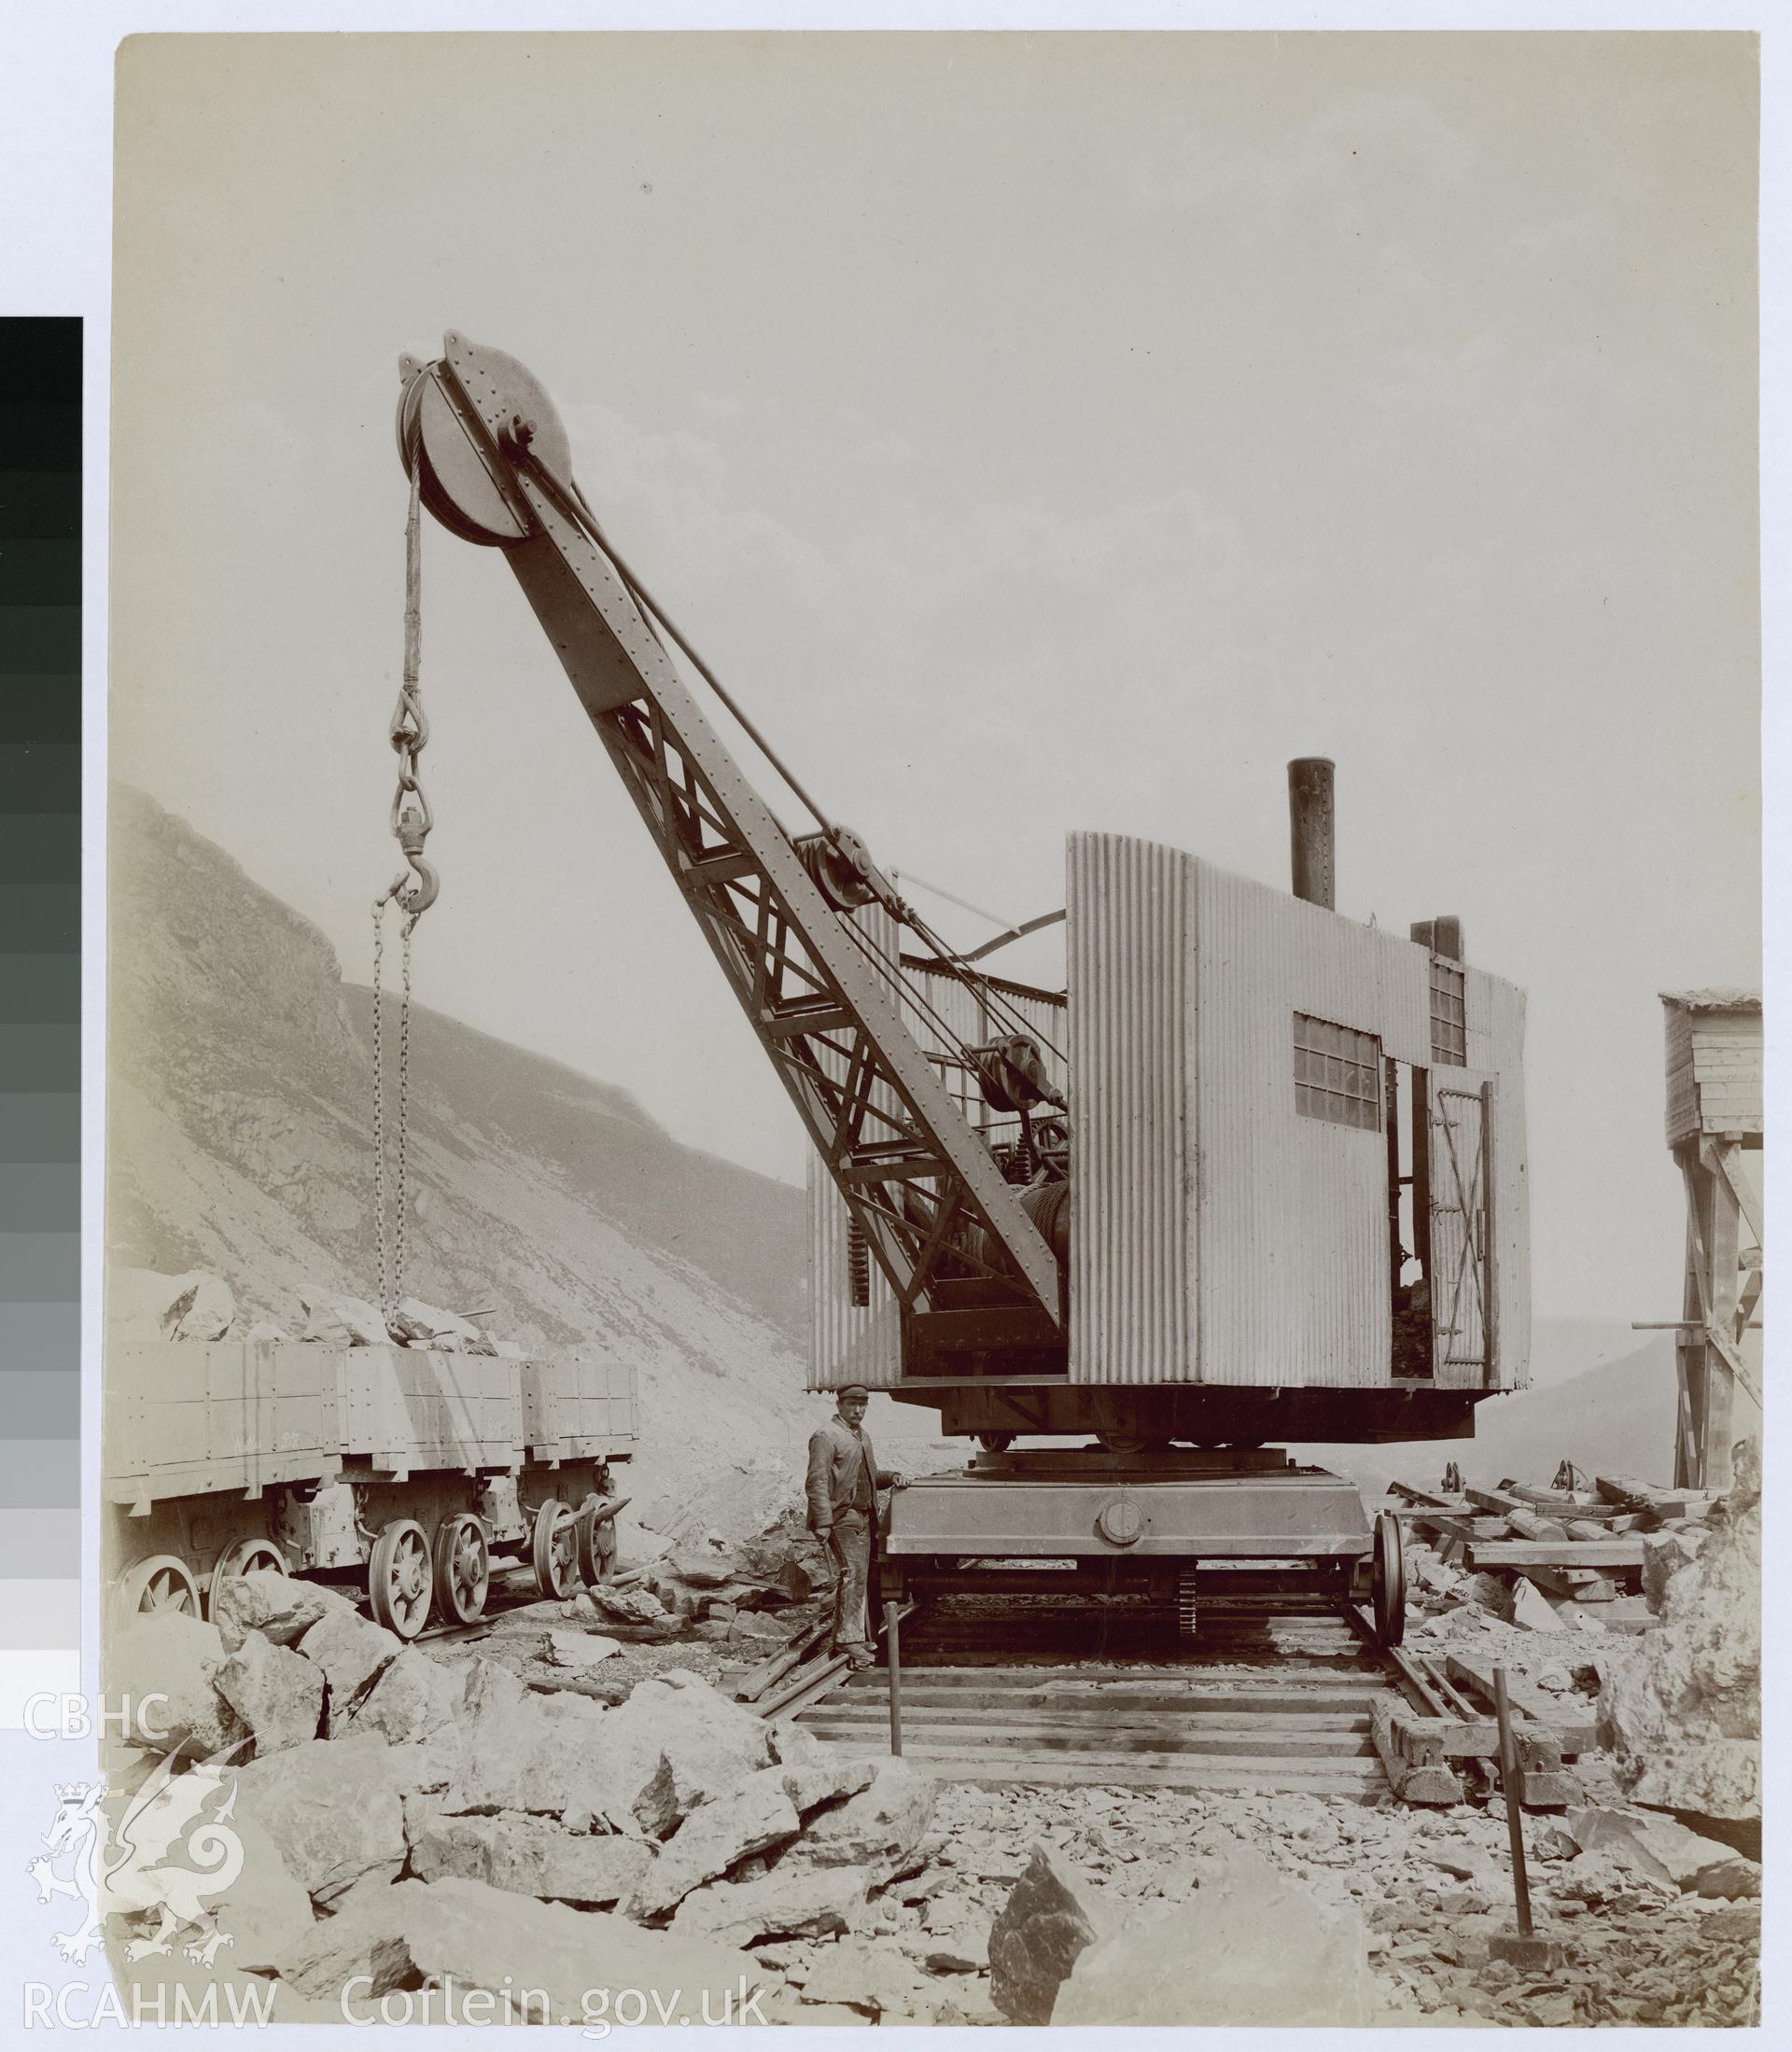 Digital copy of an albumen print from Edward Hubbard Collection showing crane loading trucks with rocks.